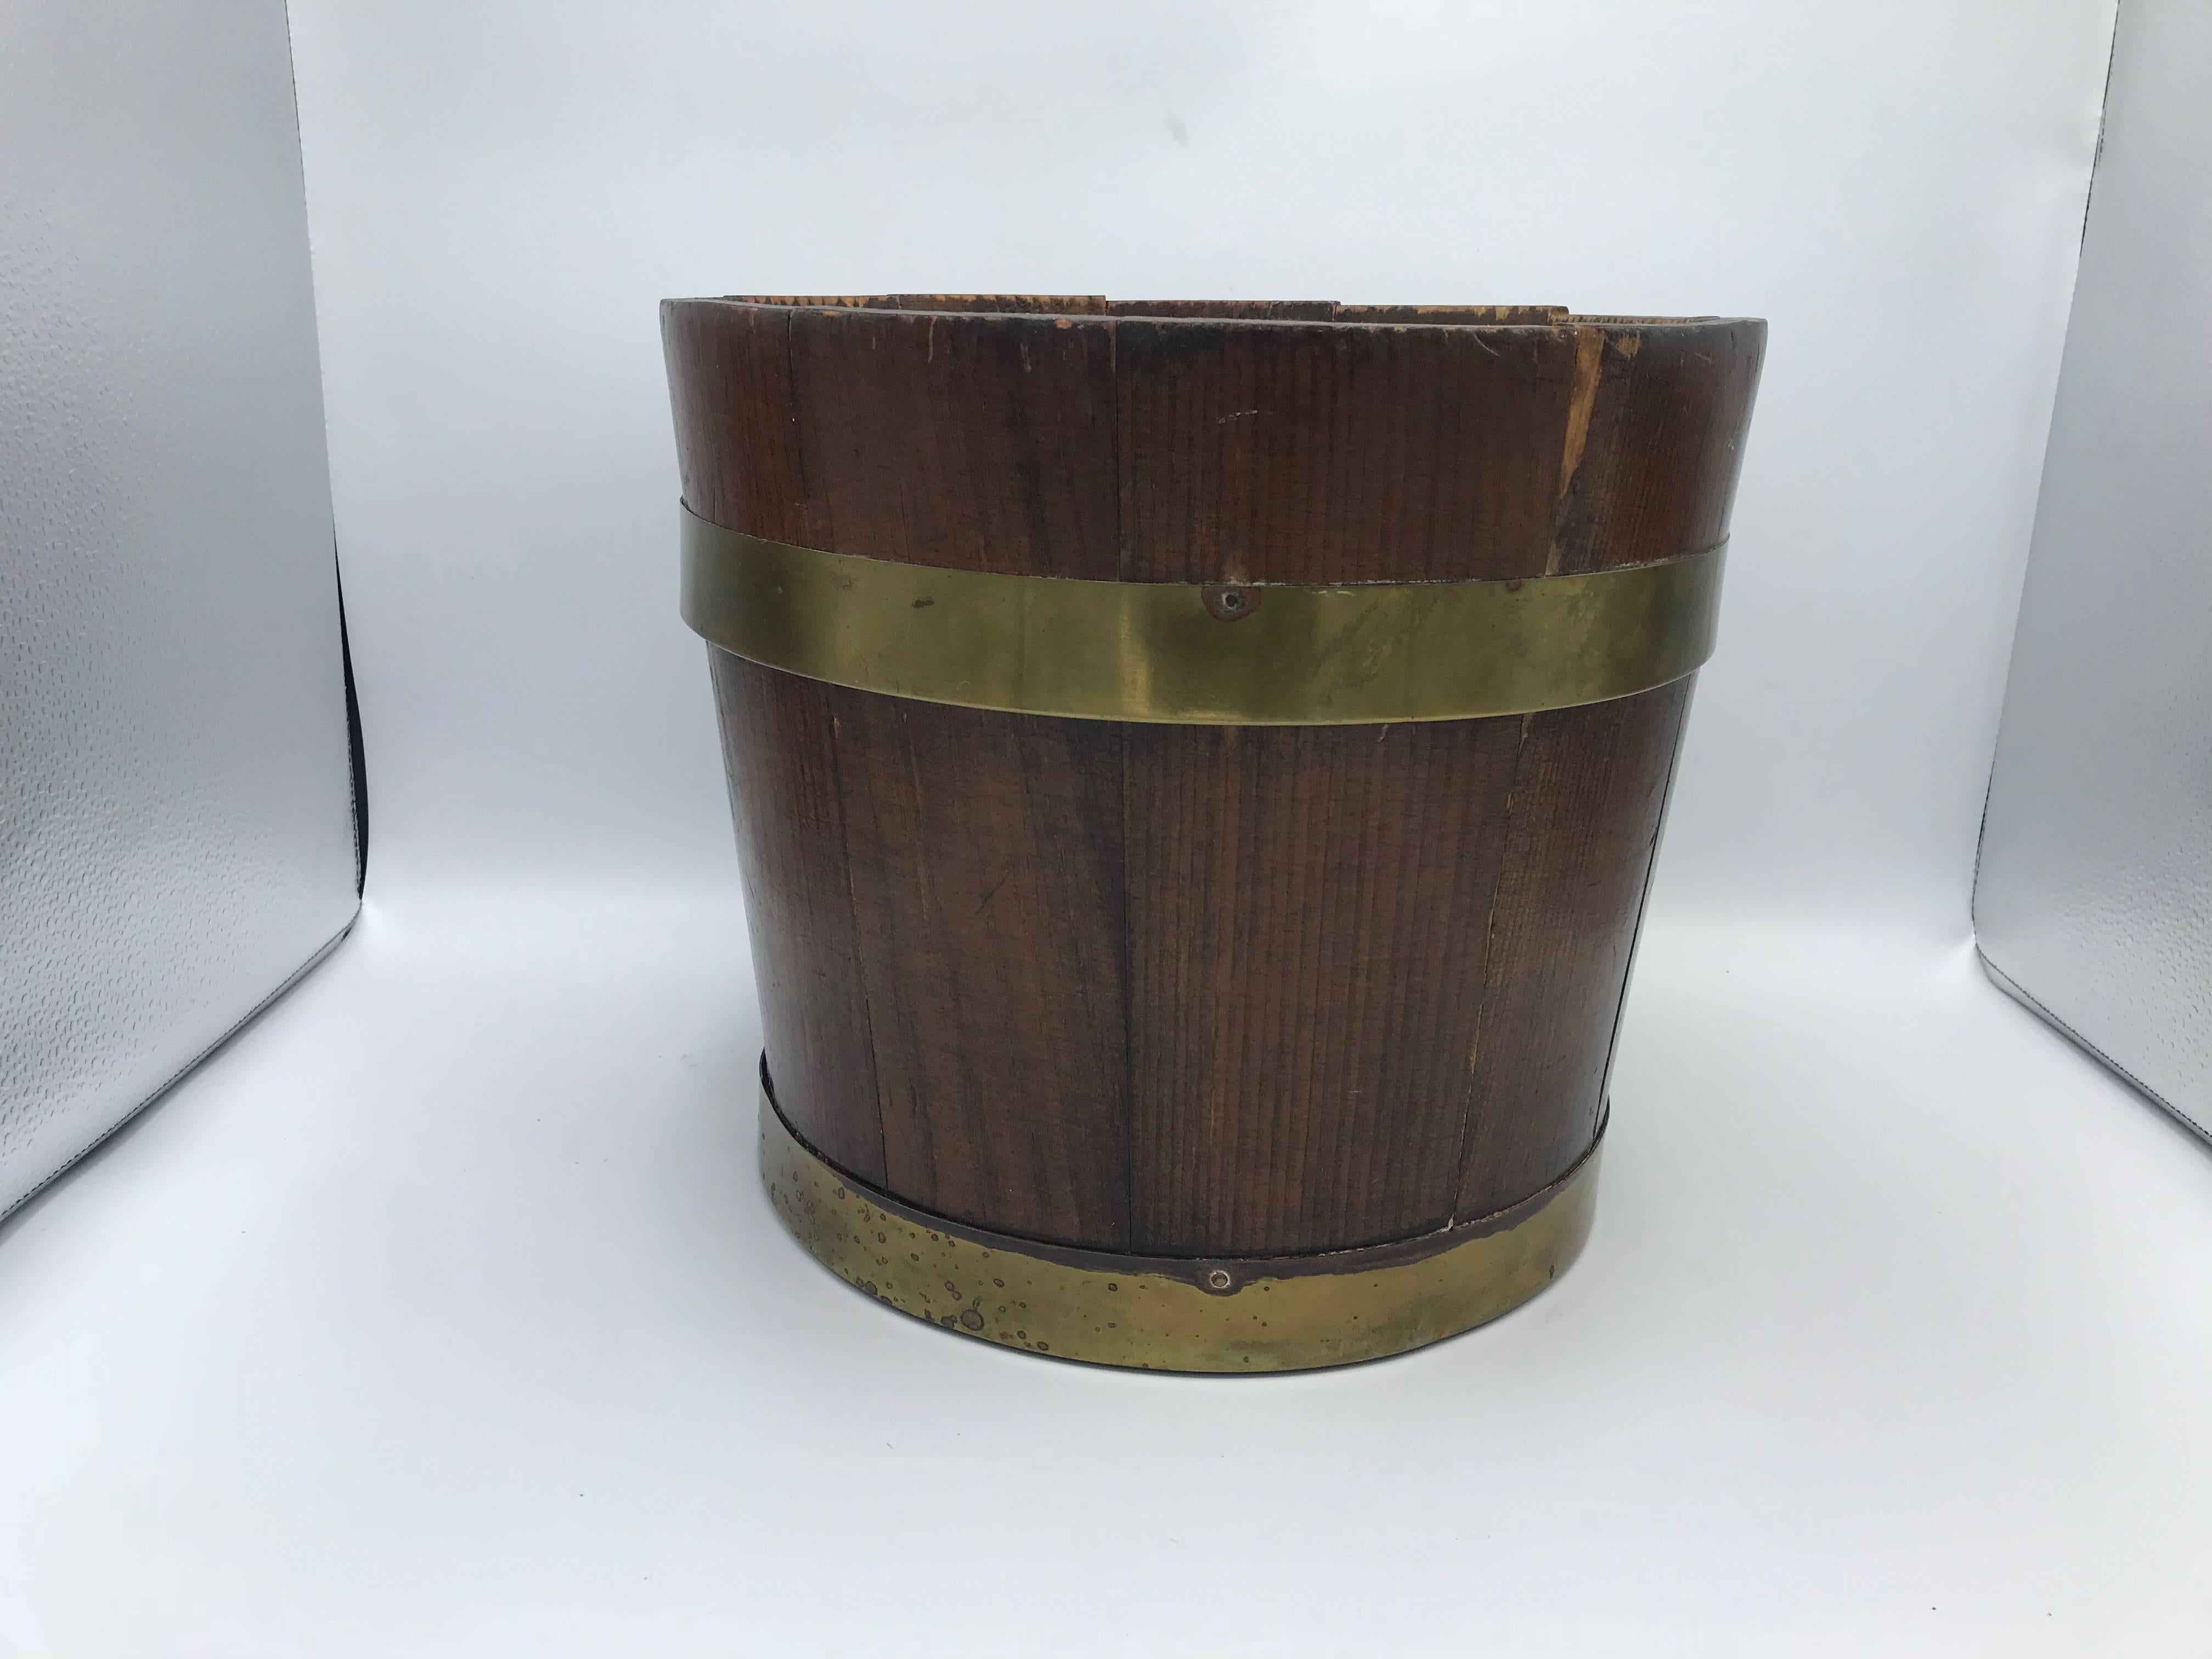 Offered is an exquisite, late 19th century English pine bucket with a brass banded collar. Could be used as a cachepot planter, centerpiece, or waste bin with appropriate liner. Lovely all-over patina to brass.